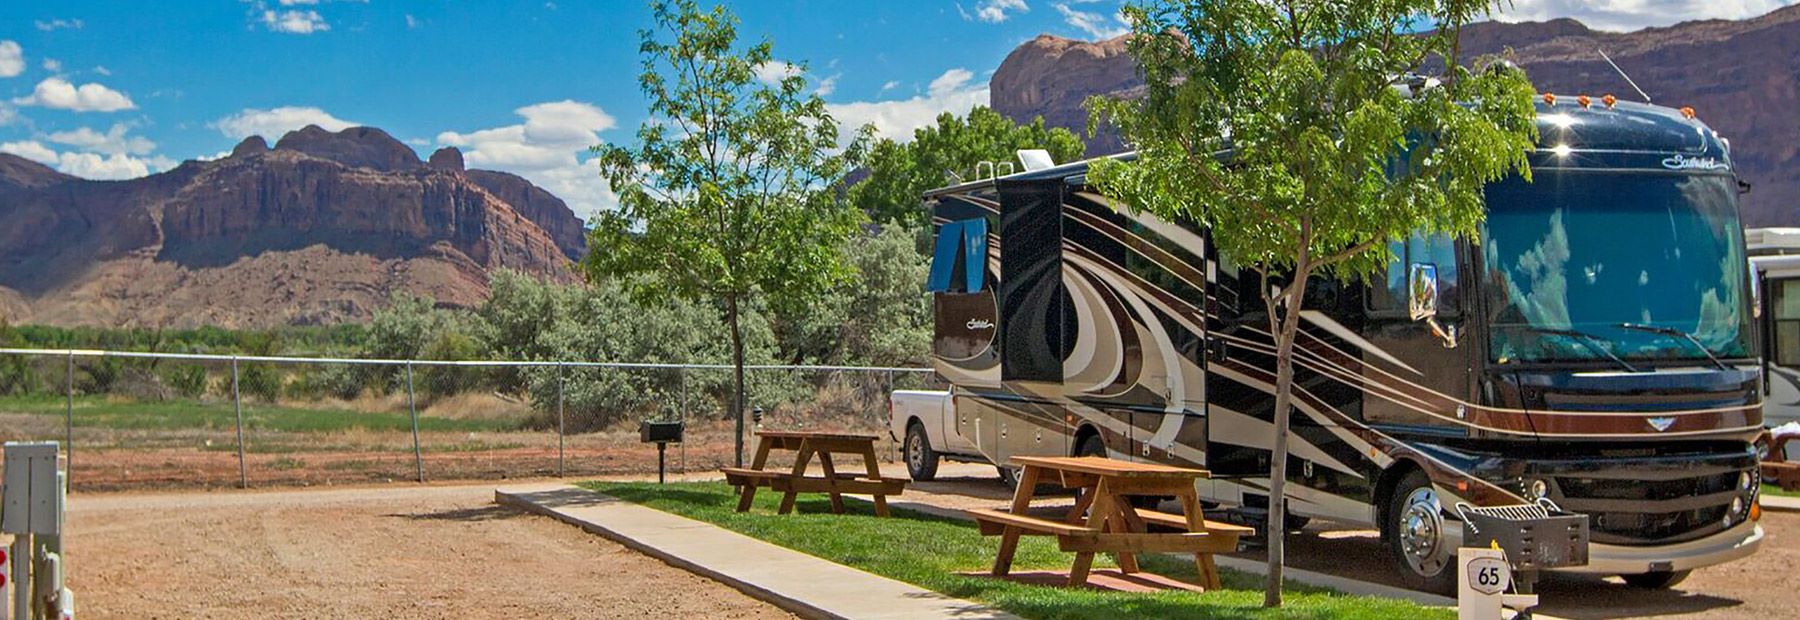 Moab Valley RV Resort & Campground Moab Valley Utah